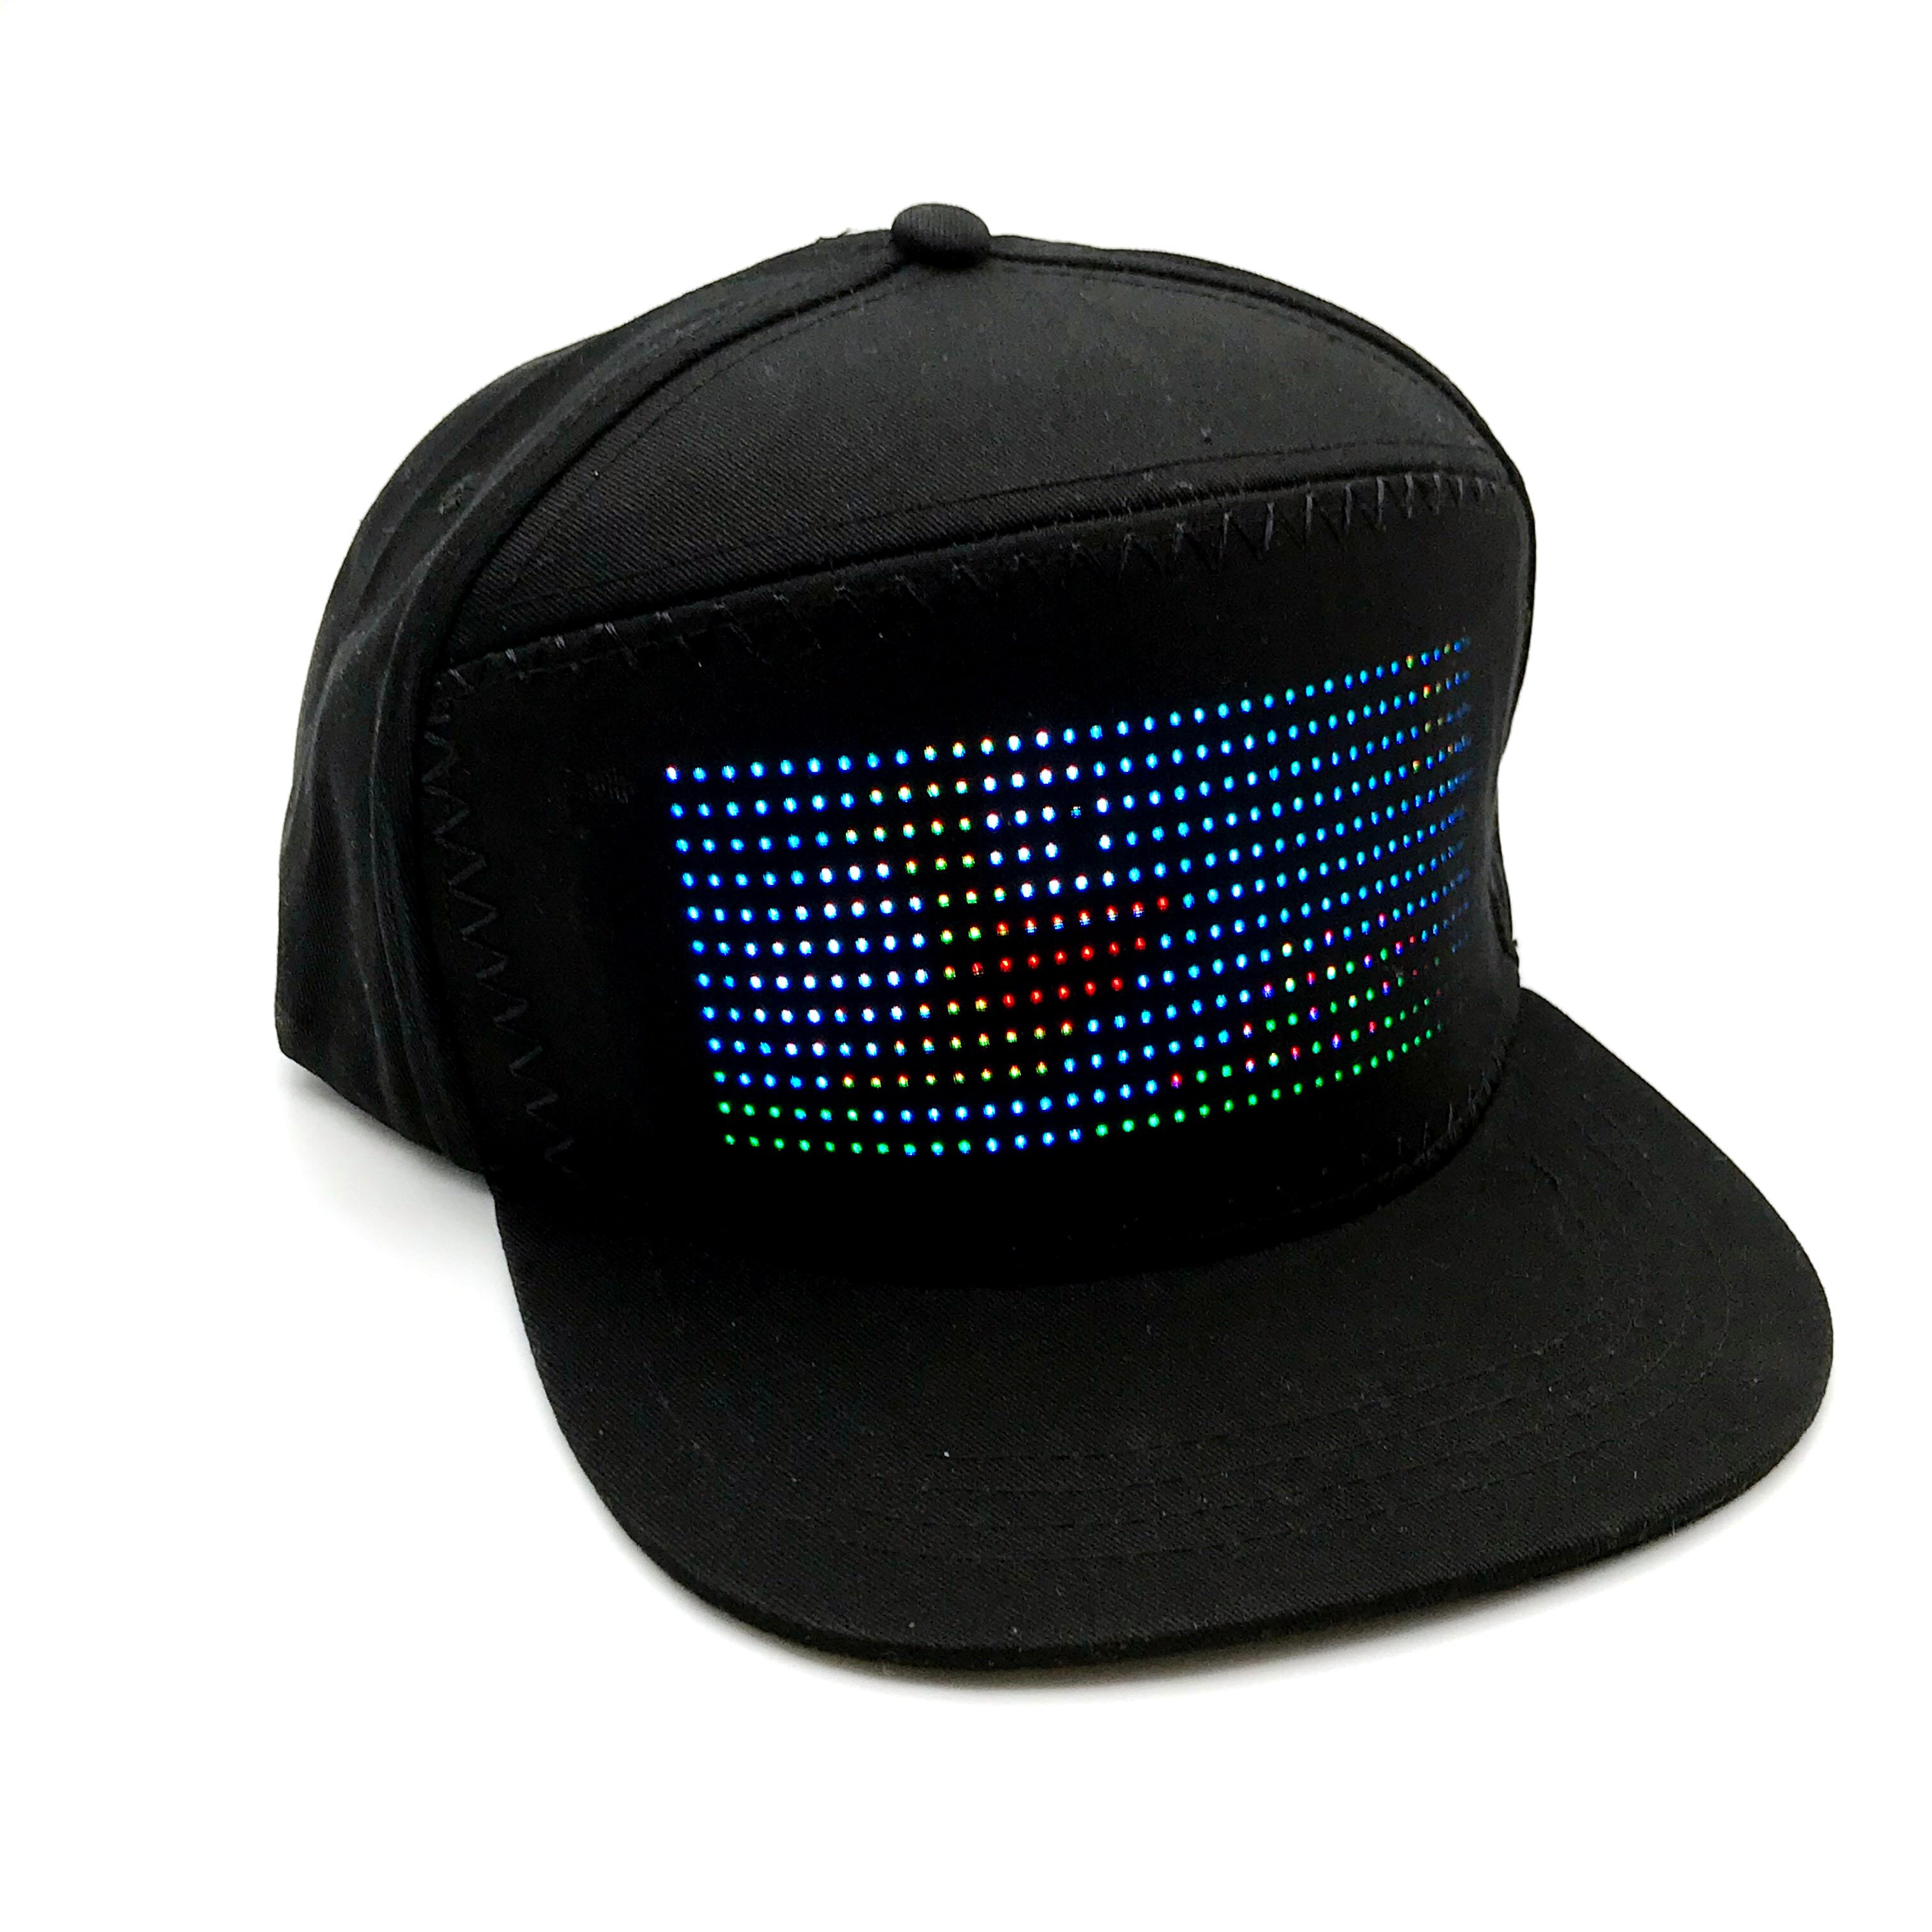 LED Cap, LED Display Screen Smart Hat Bluetooth Adjustable Cool Hat for Party Club: RGB Fullcolor